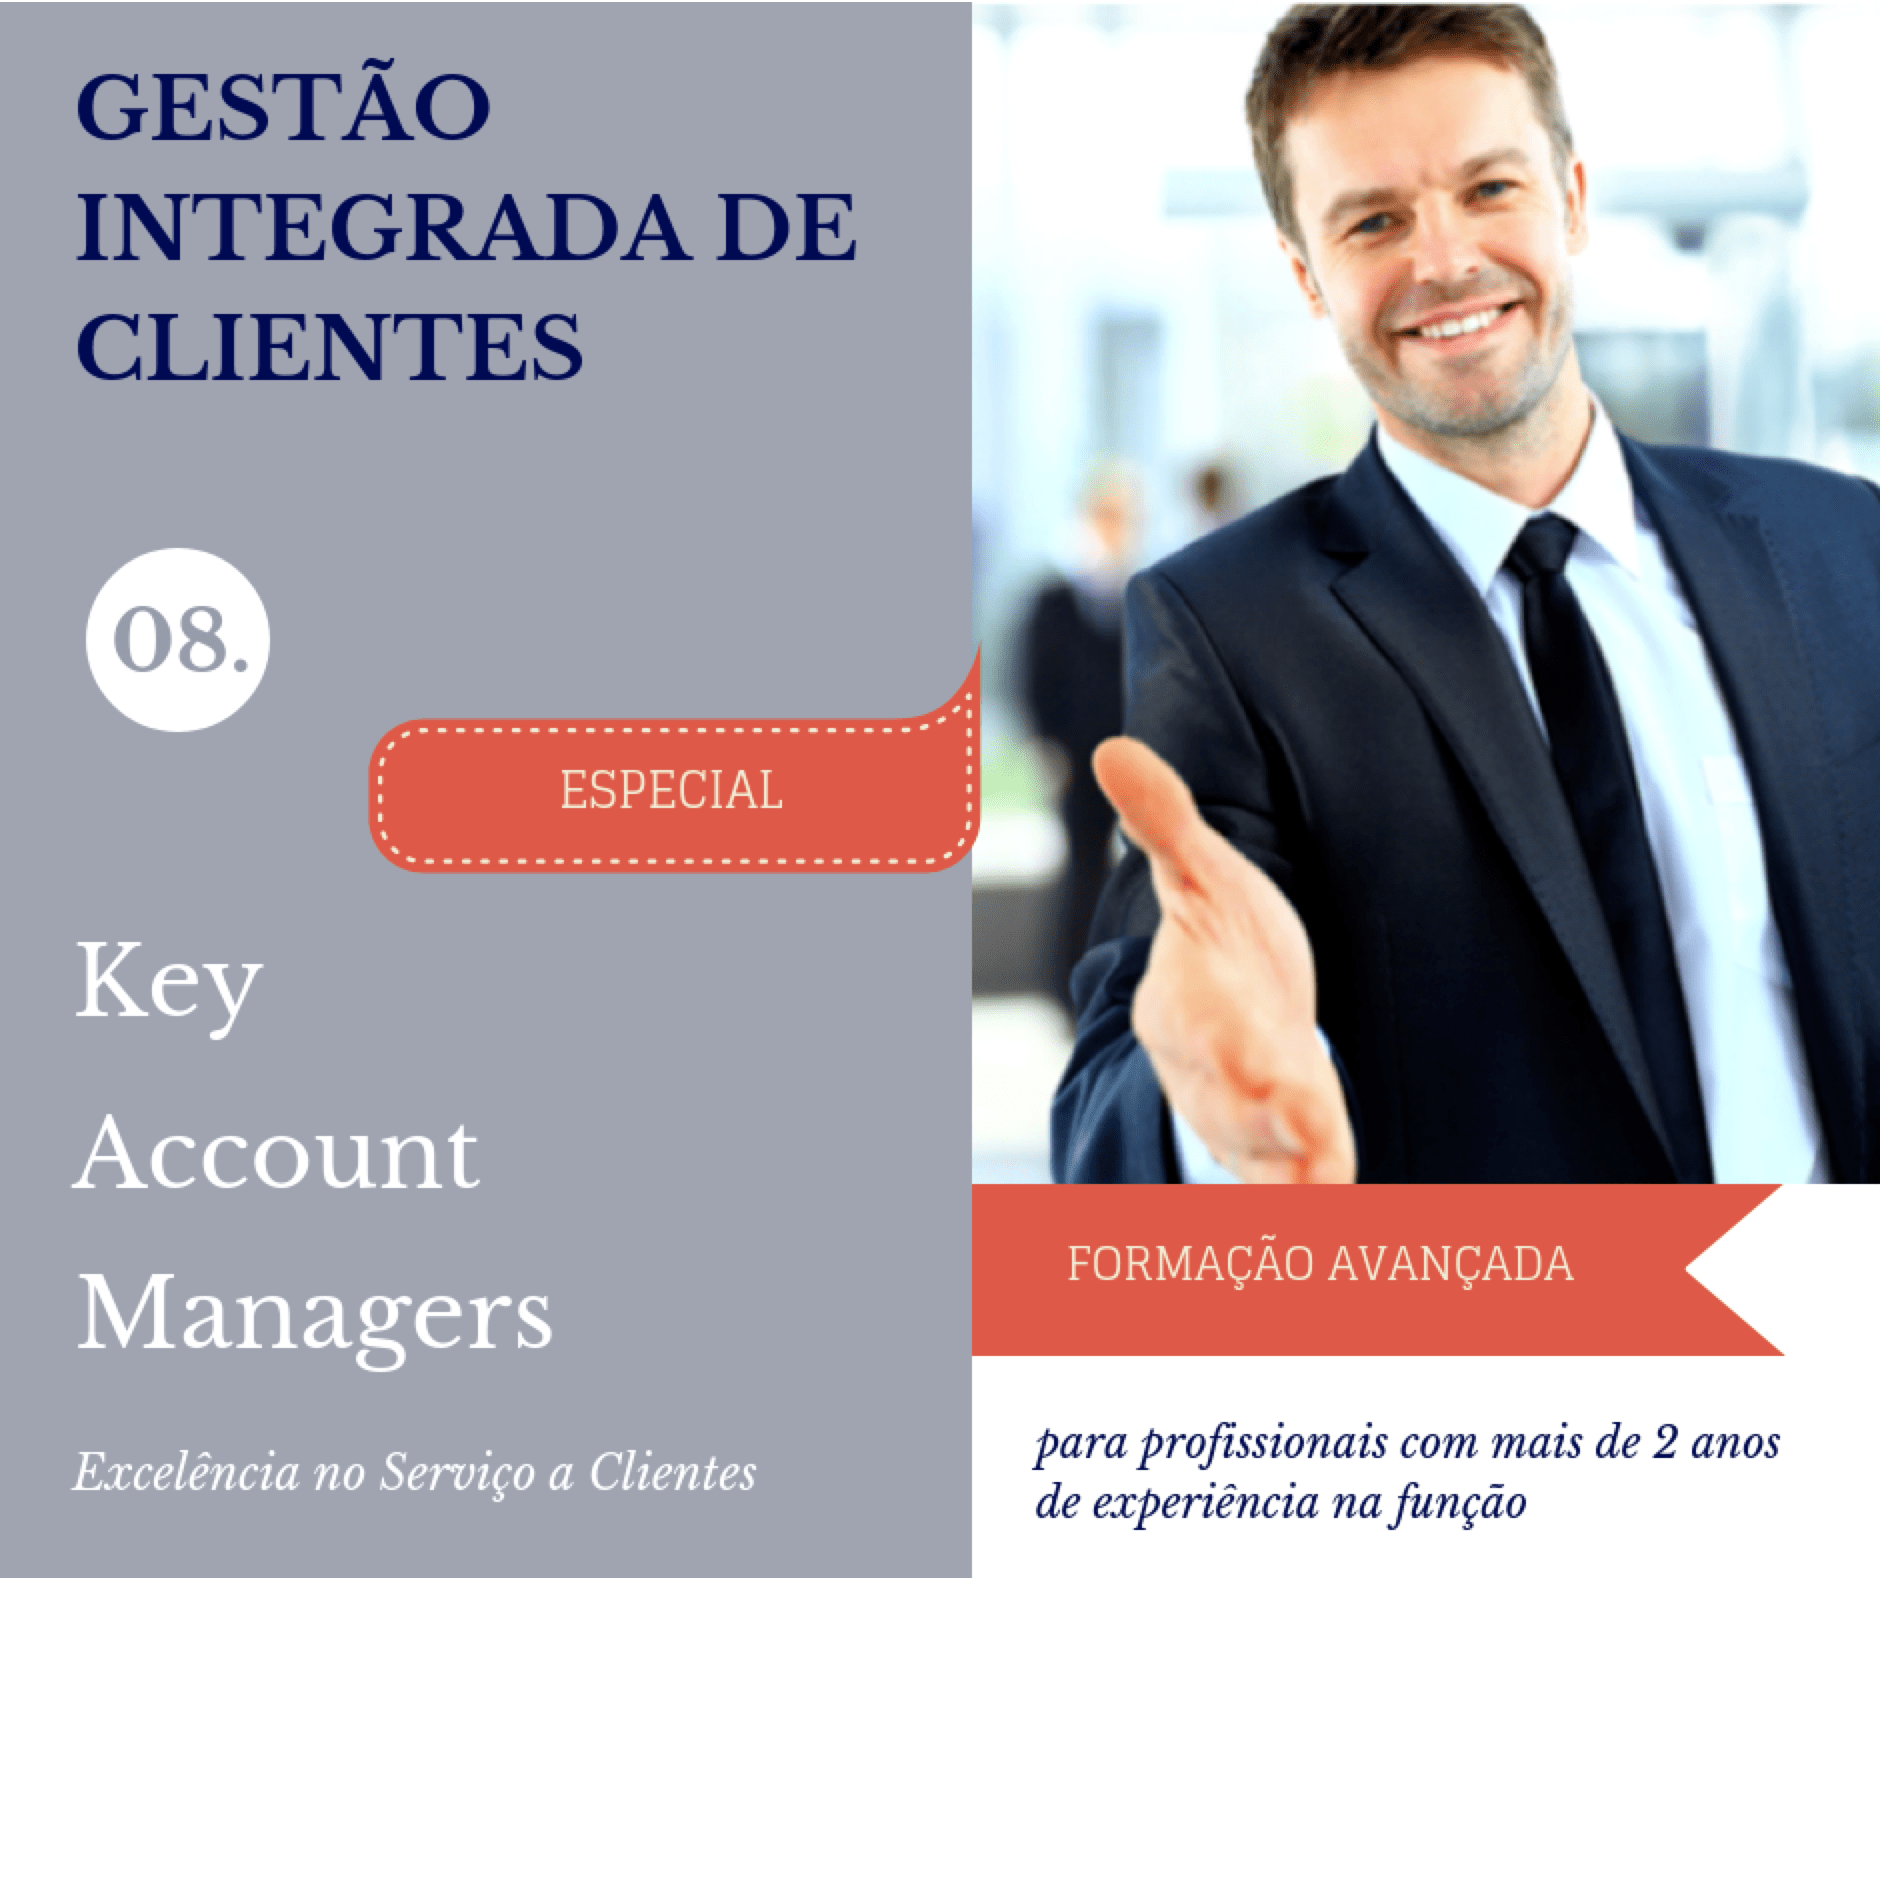 Key Account Managers